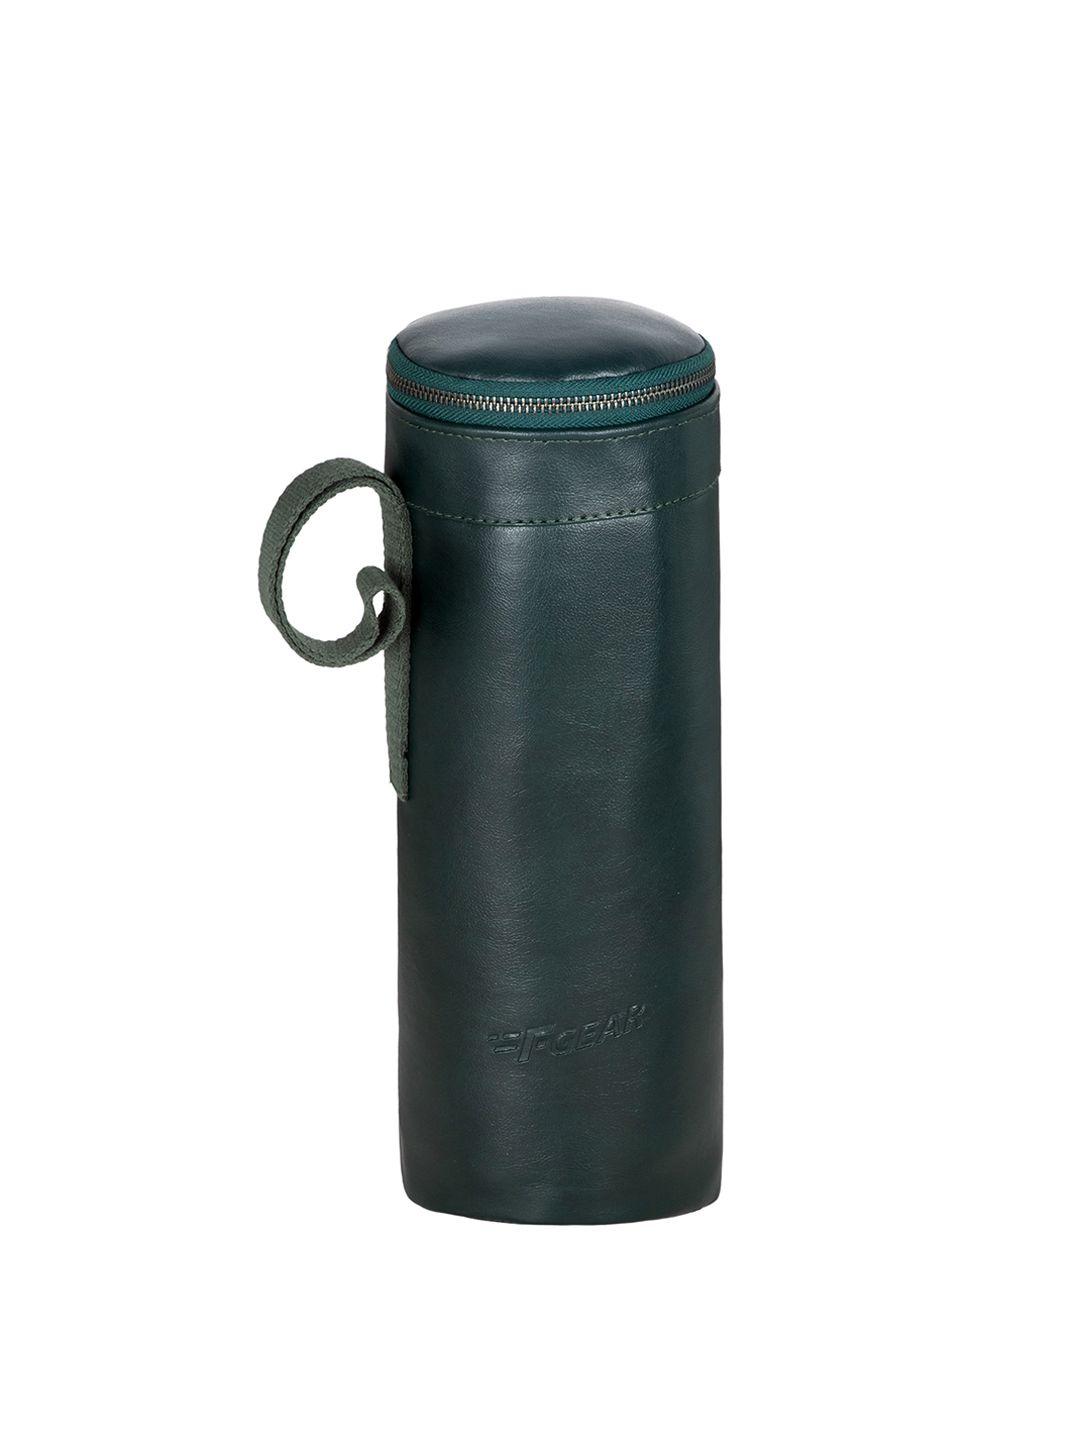 f gear premium leatherette insulated bottle holder